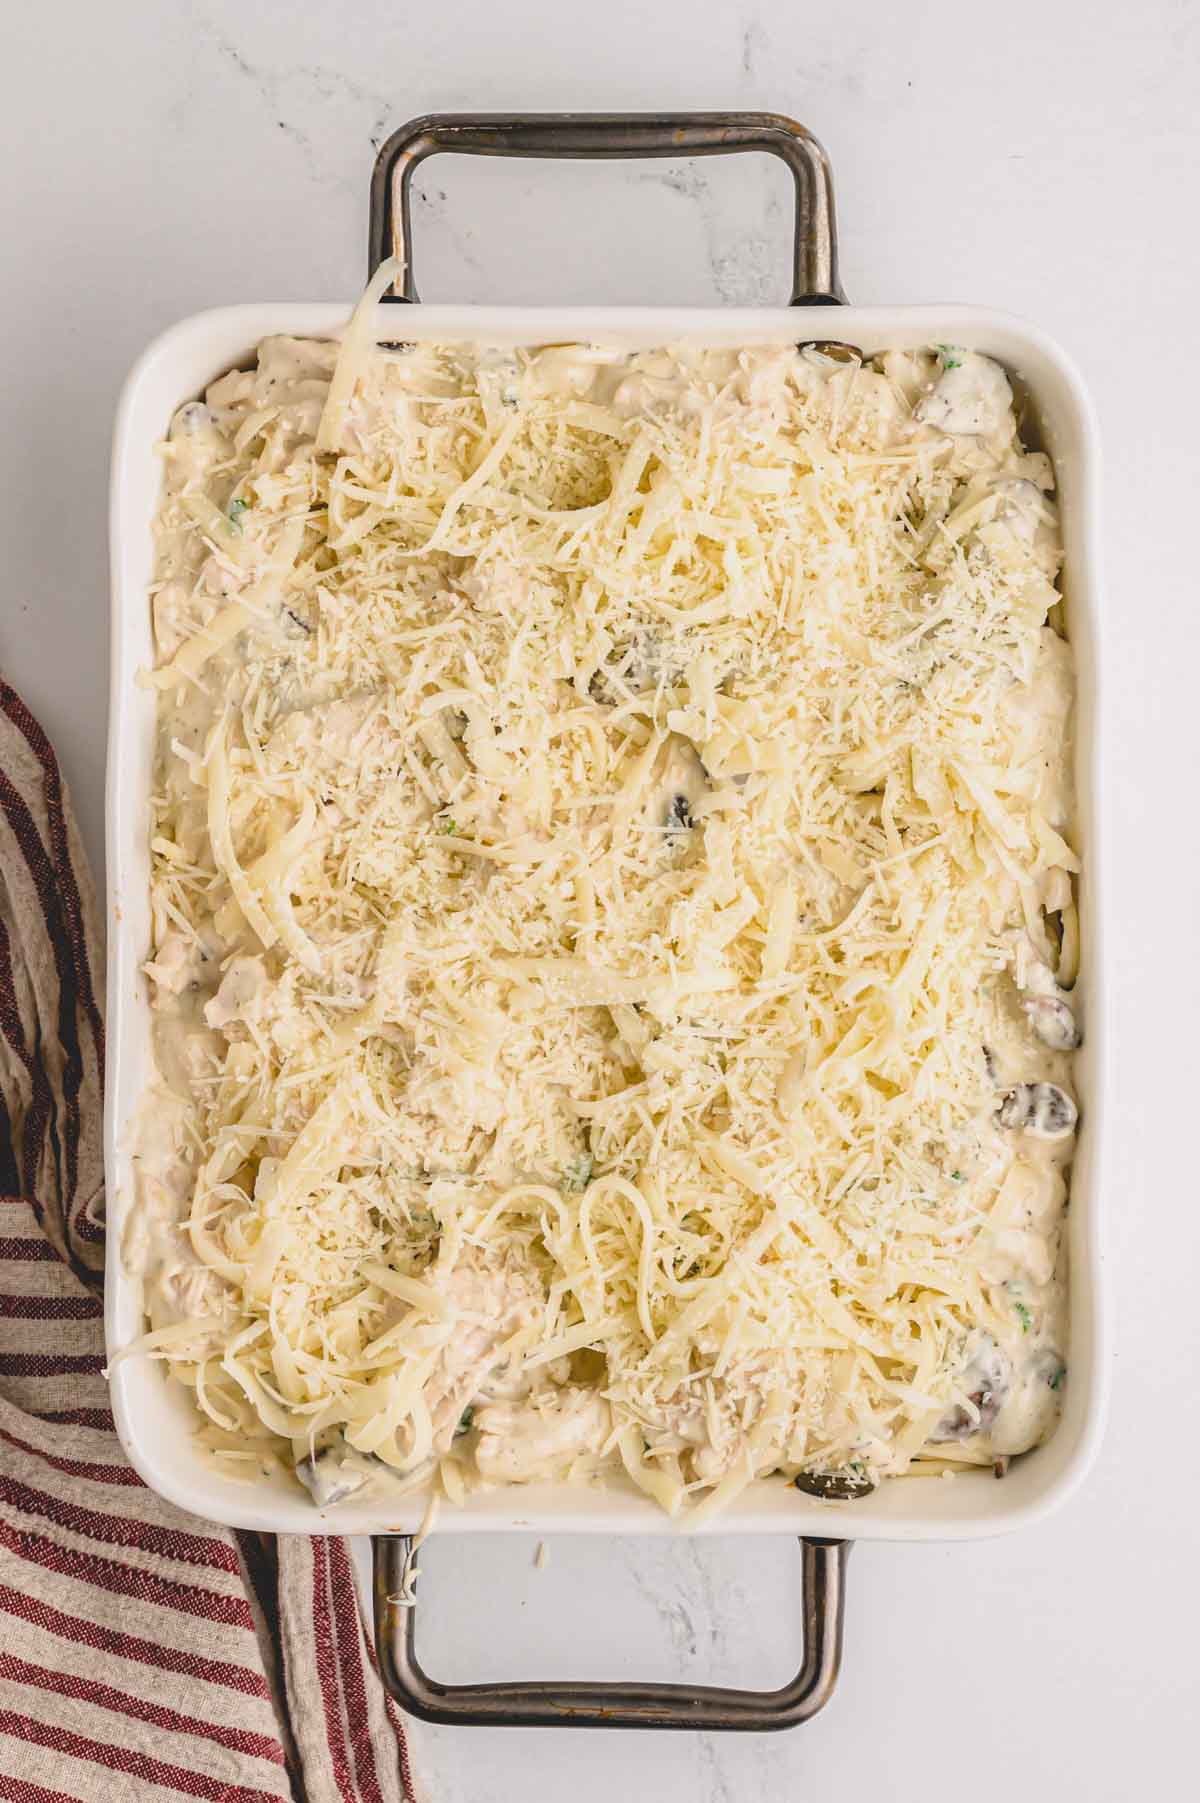 Uncooked tetrazzini sprinkled with cheese in a baking dish.